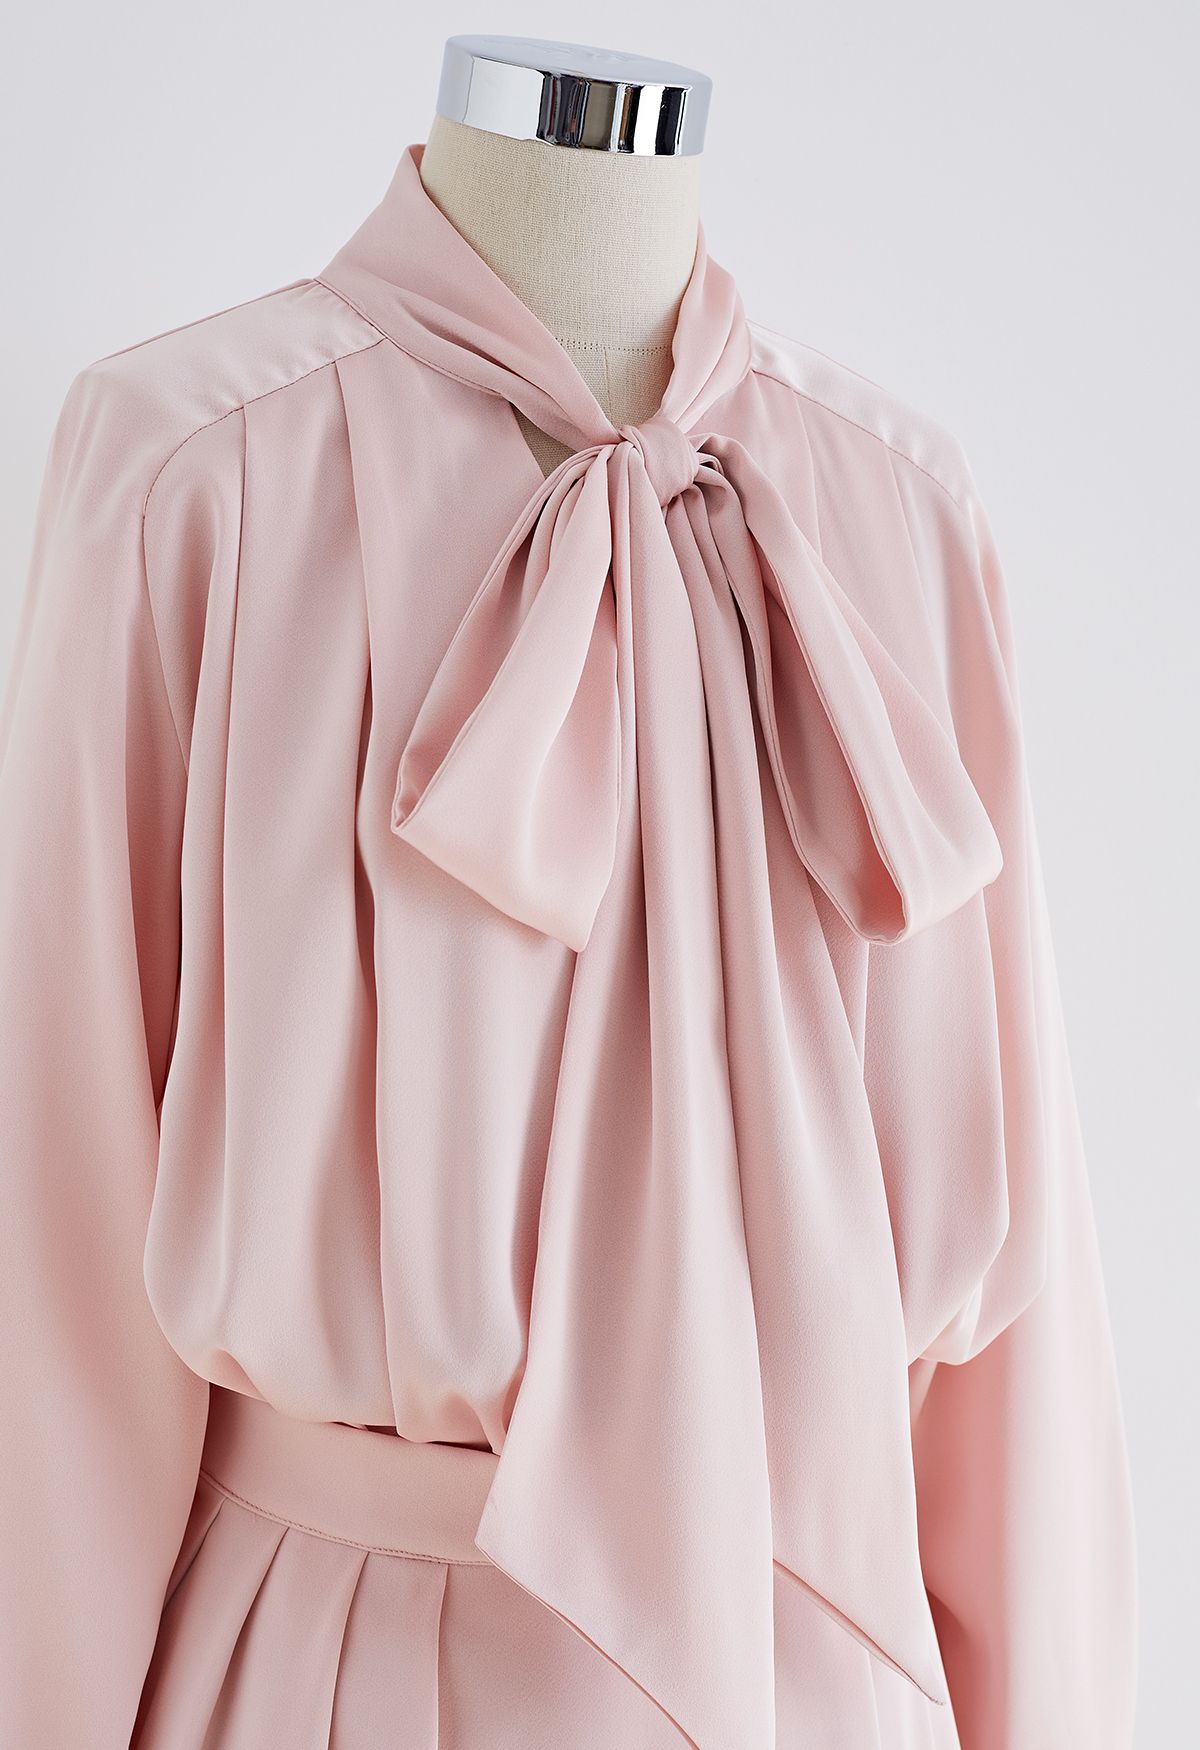 Bowknot Neckline Pleated Satin Dress in Pink